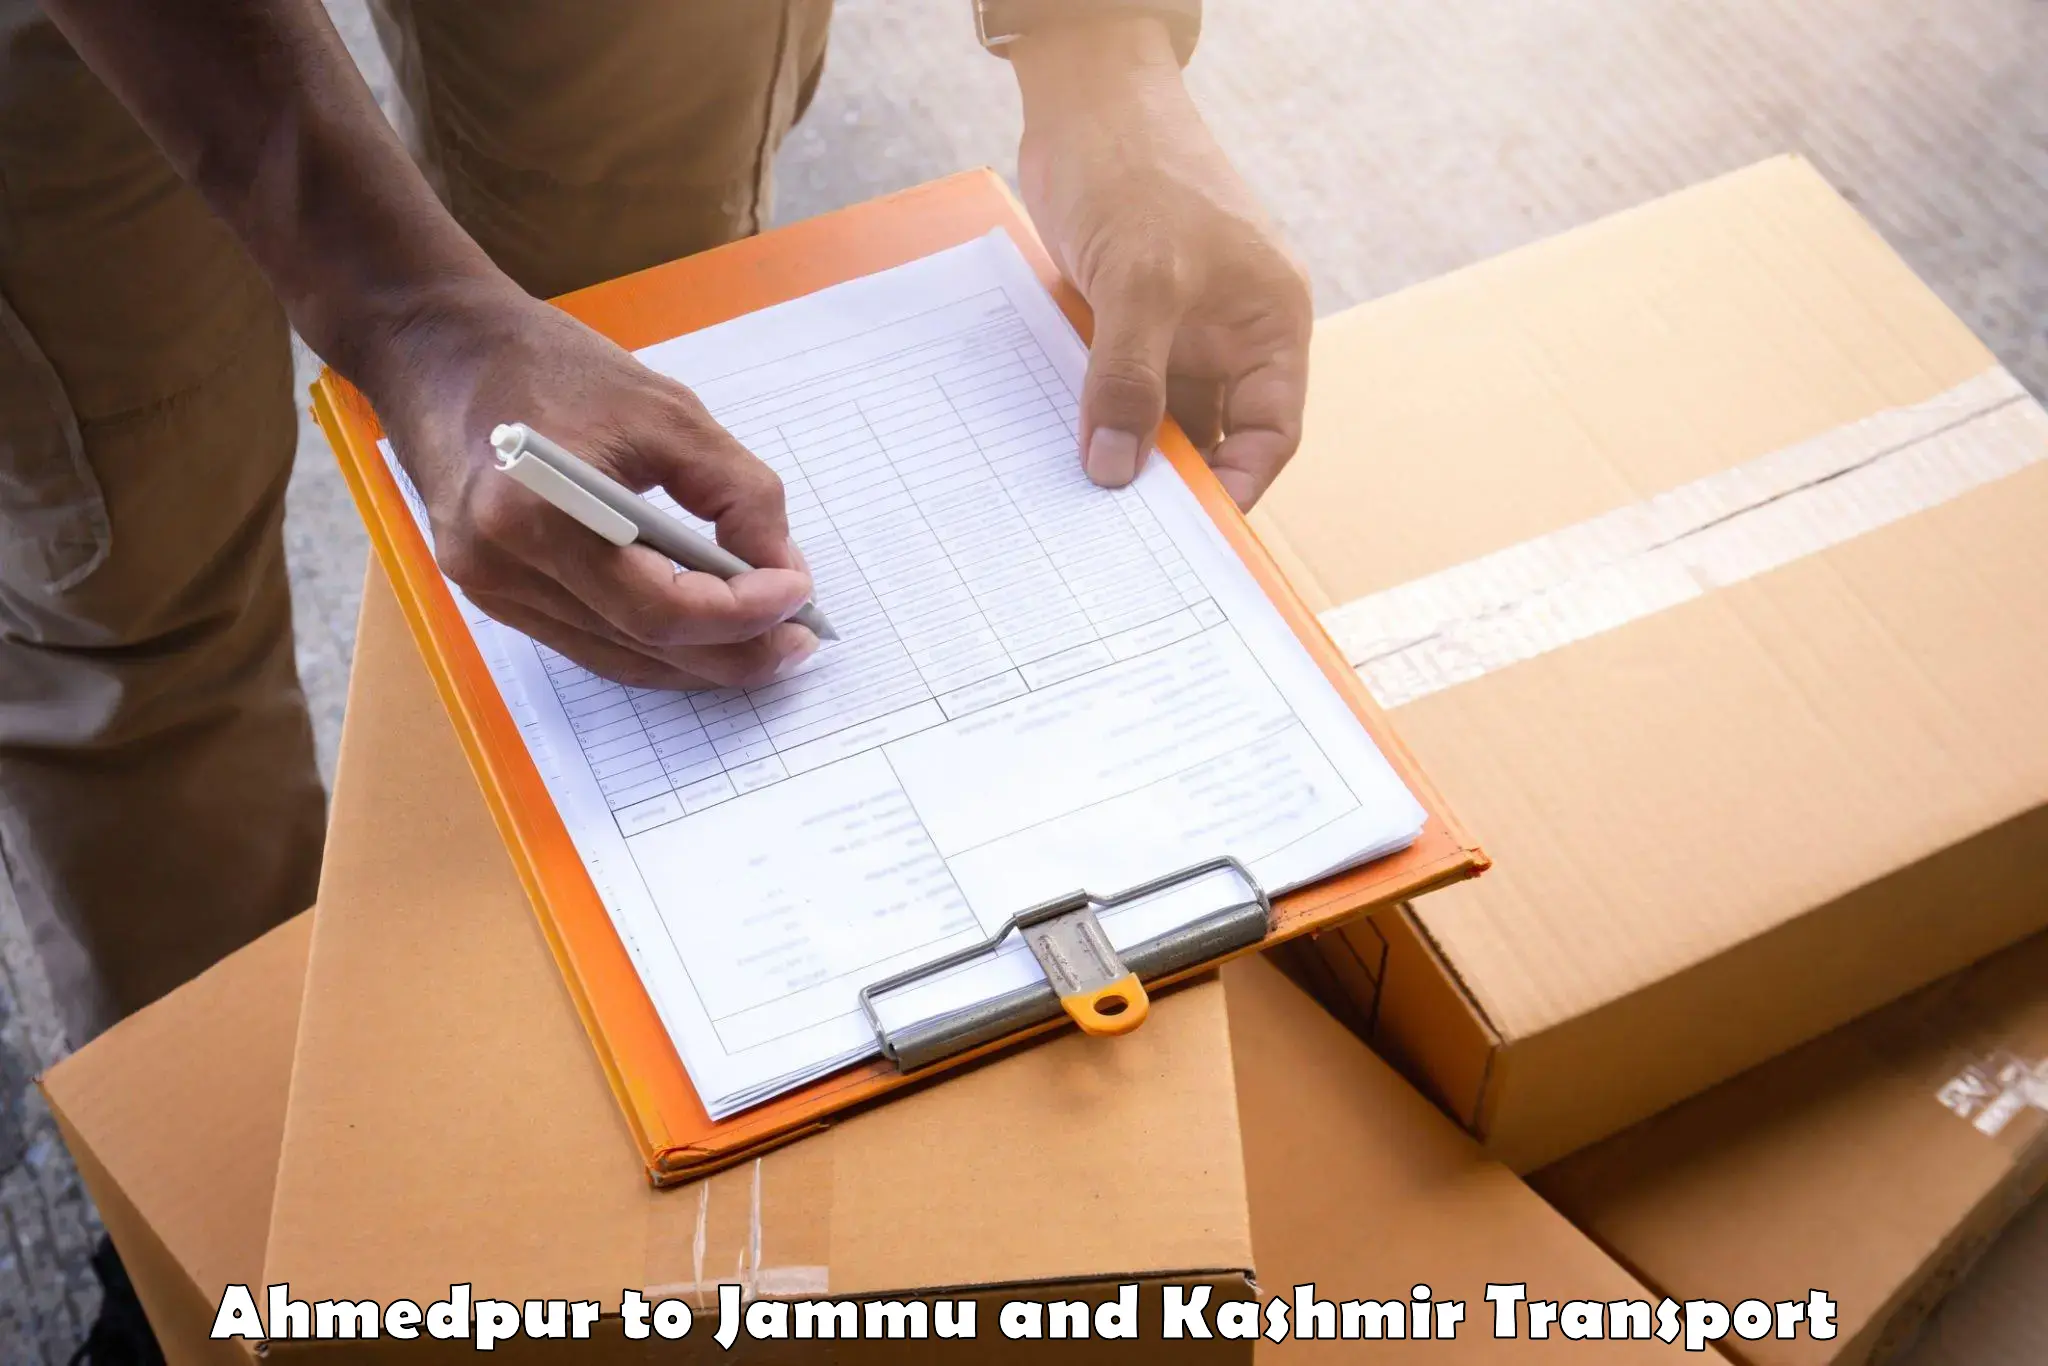 Domestic goods transportation services in Ahmedpur to Anantnag